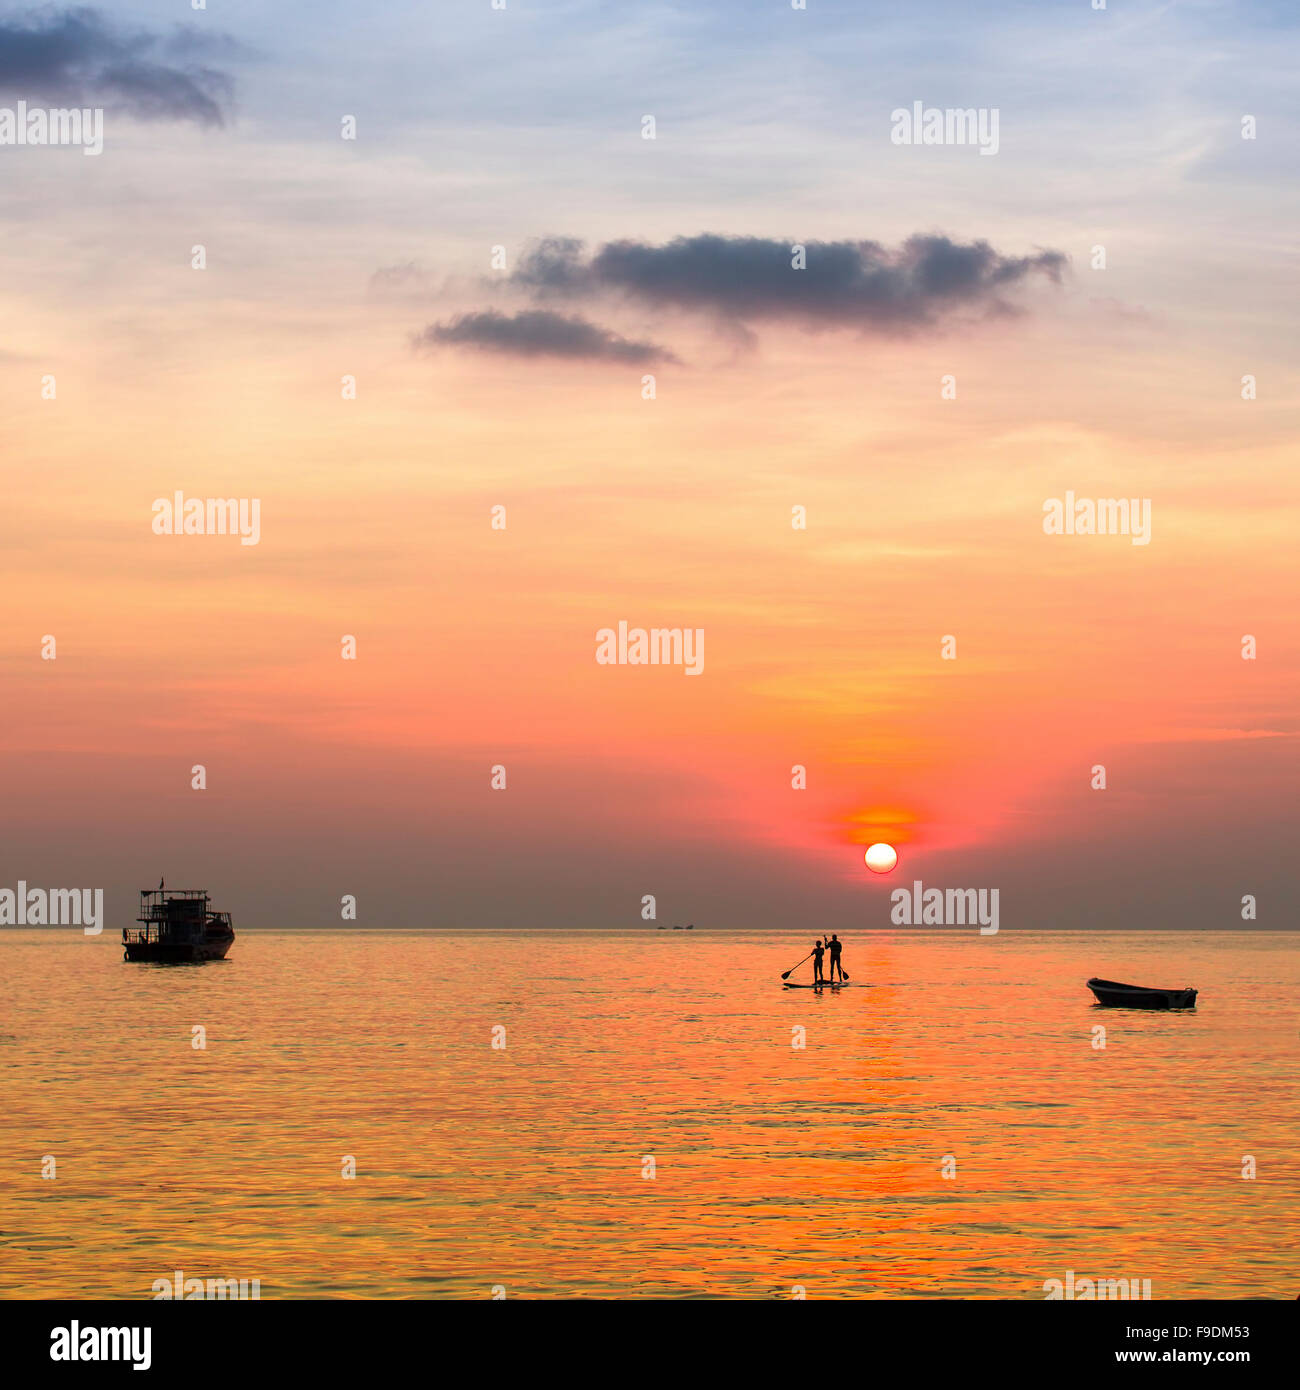 Couple on the boards in the sea during beautiful sunset in the Gulf of Thailand. Stock Photo